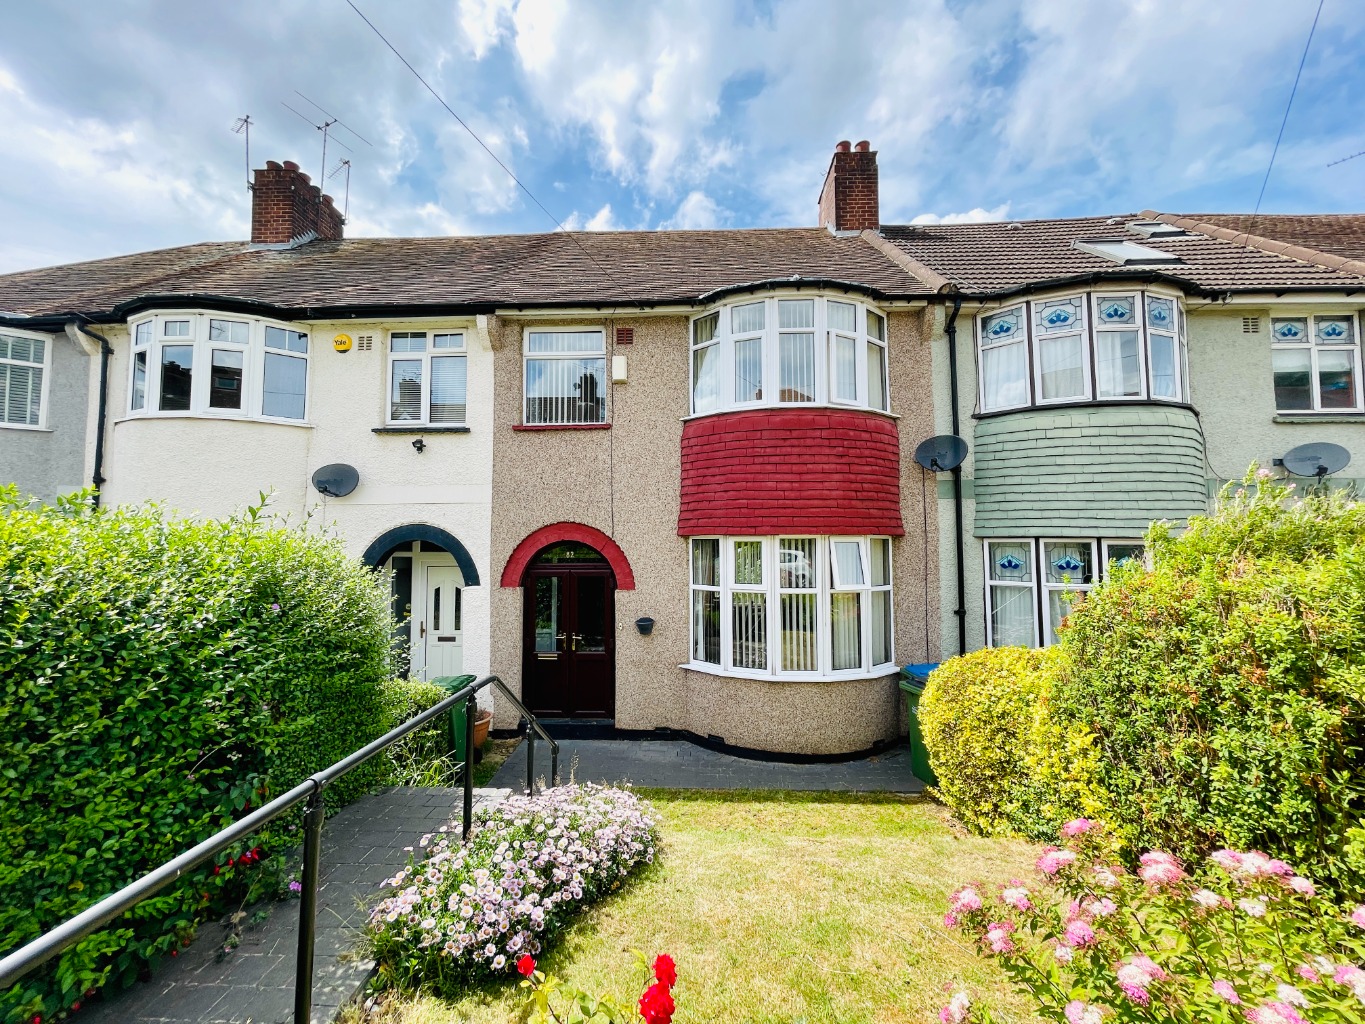 Situated on the Shooters Hill slopes, this property has panoramic views to London from the rear elevation, also being visible from the garden, dining room and rear bedroom.